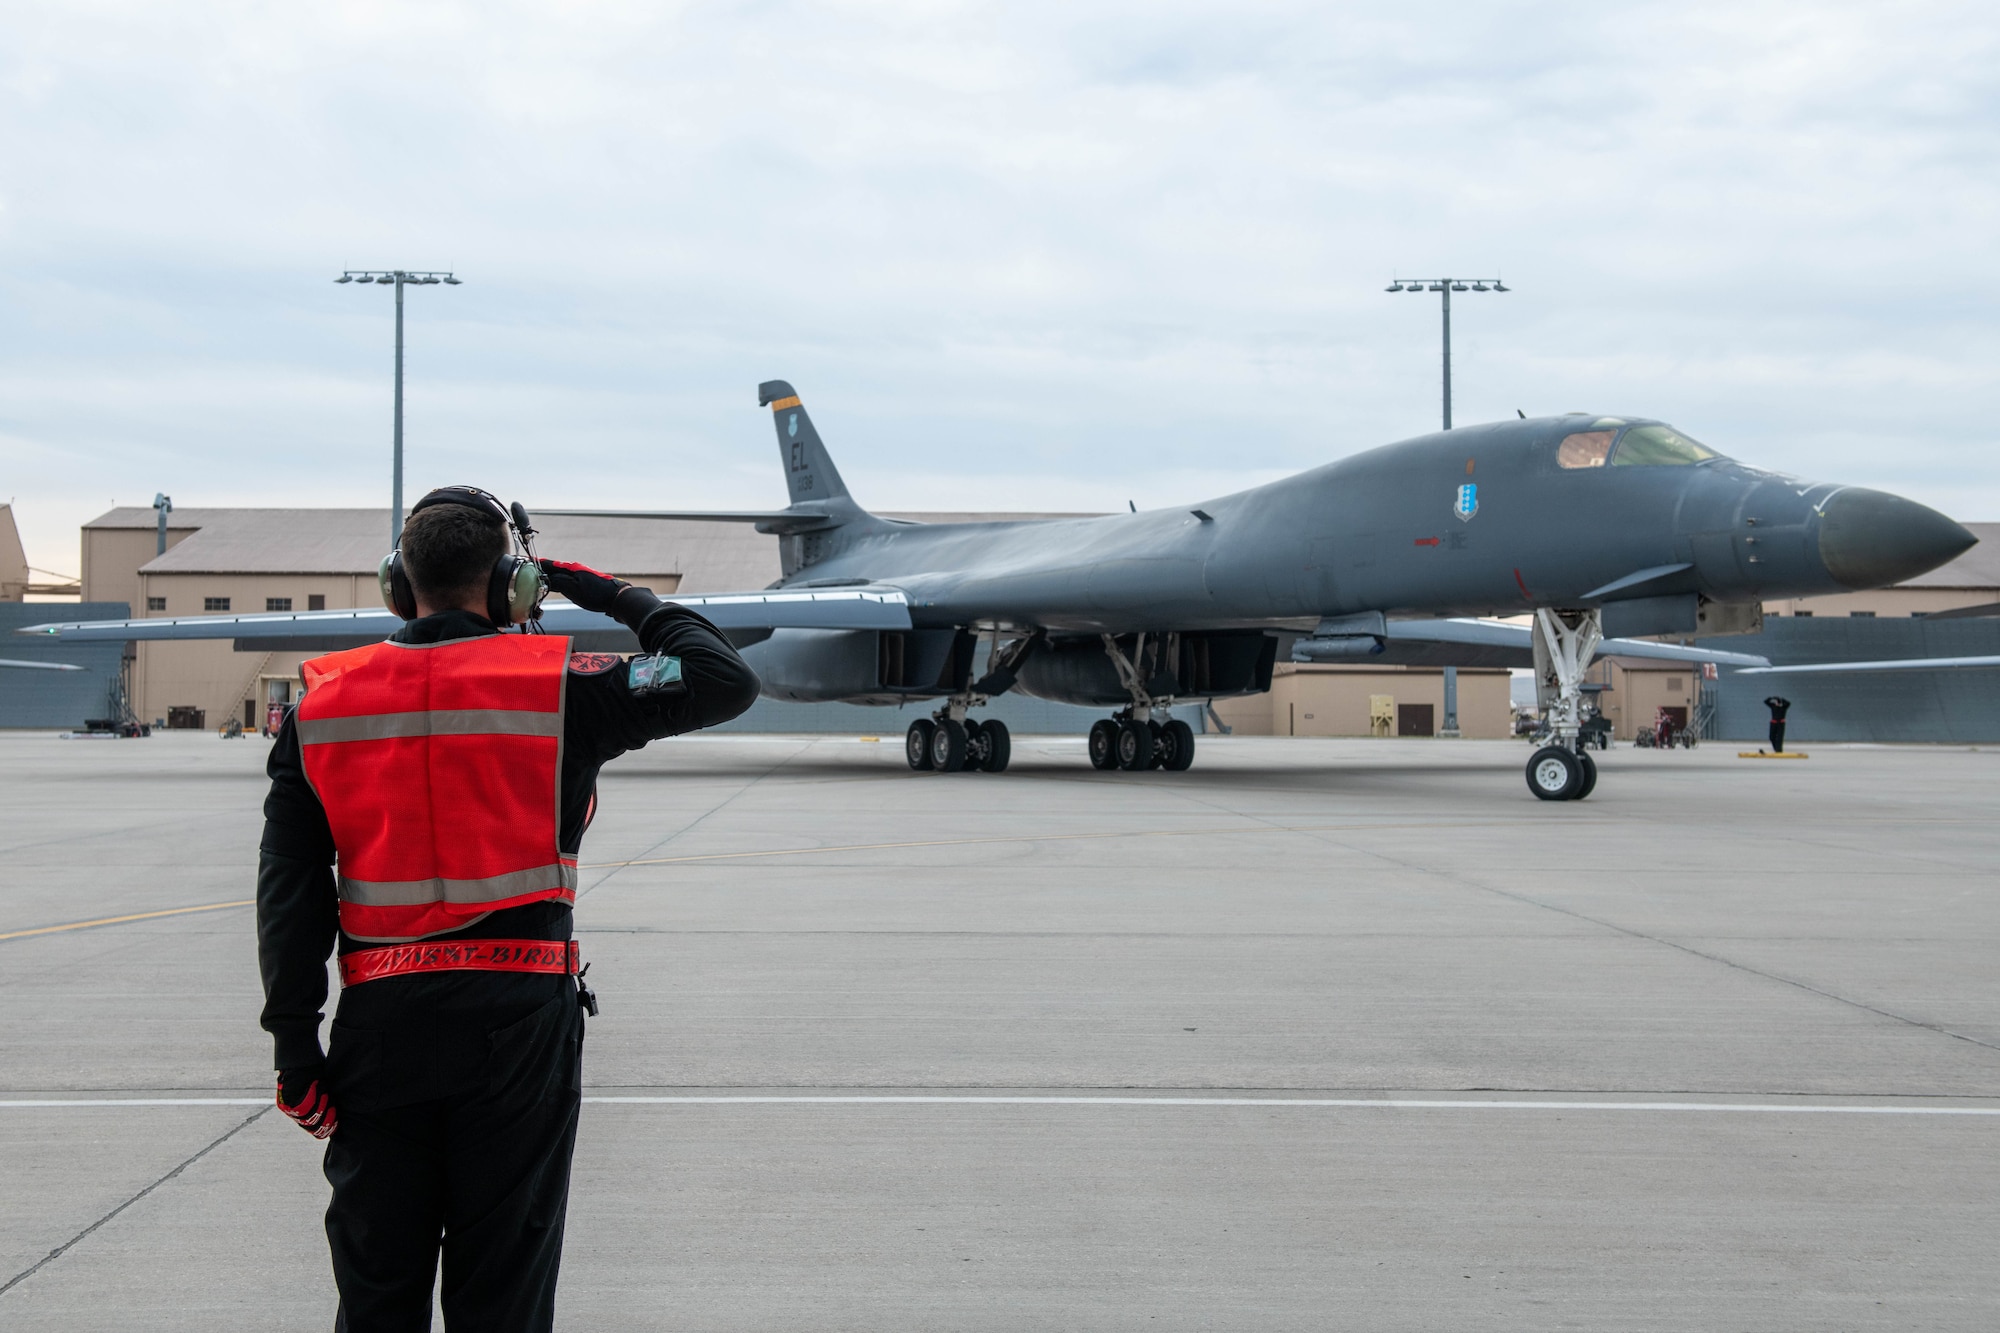 A crew chief assigned to the 34th Bomb Squadron salutes Maj. Gen. Andrew Gebara, 8th Air Force and Joint-Global Strike Operations Center commander, before takeoff at Ellsworth Air Force Base, S.D., Oct. 26, 2021. Gebara visited Ellsworth to gain an understanding of the B-1B Lancer’s mission and role in strategic deterrence operations. (U.S. Air Force photo by Airman 1st Class Quentin Marx)